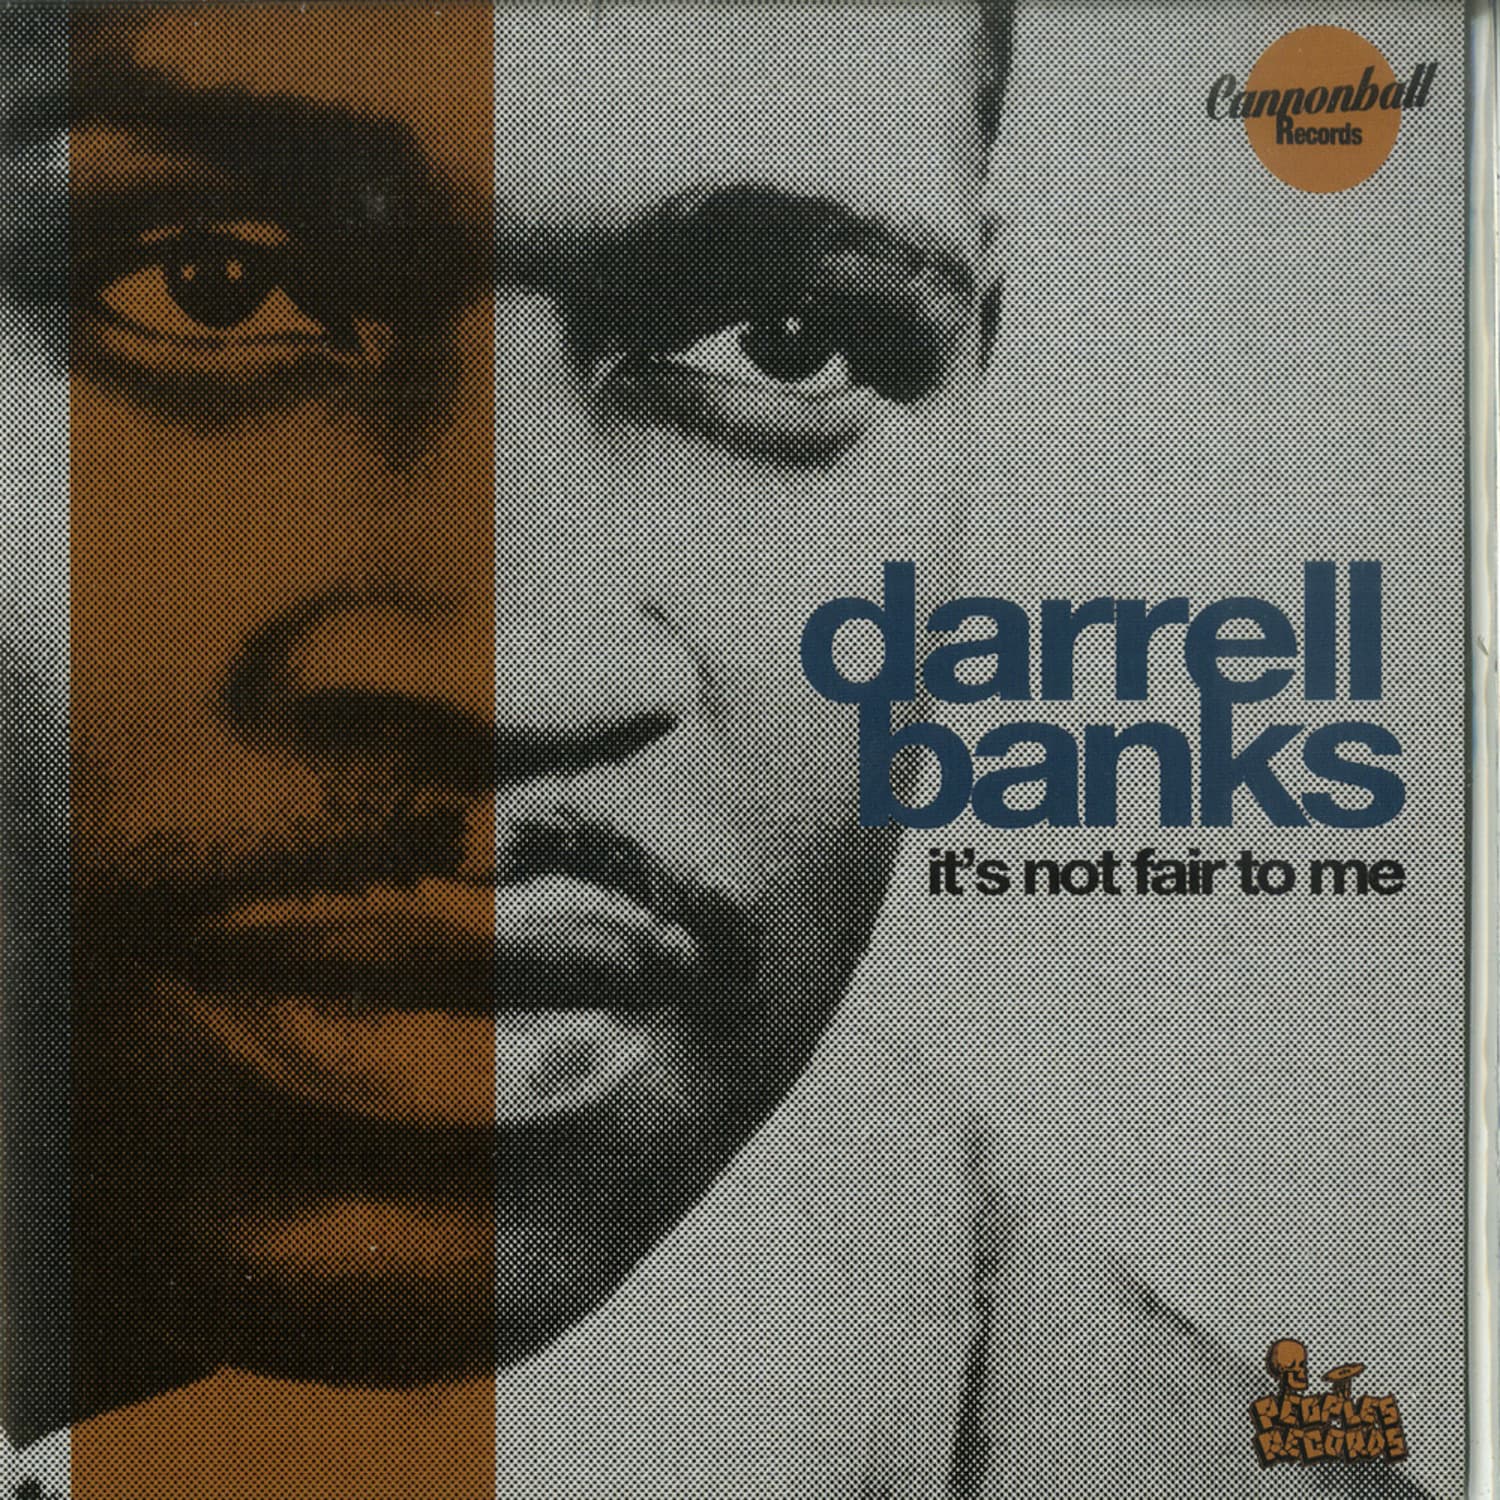 Darrell Banks - IT S NOT FAIR TO ME 